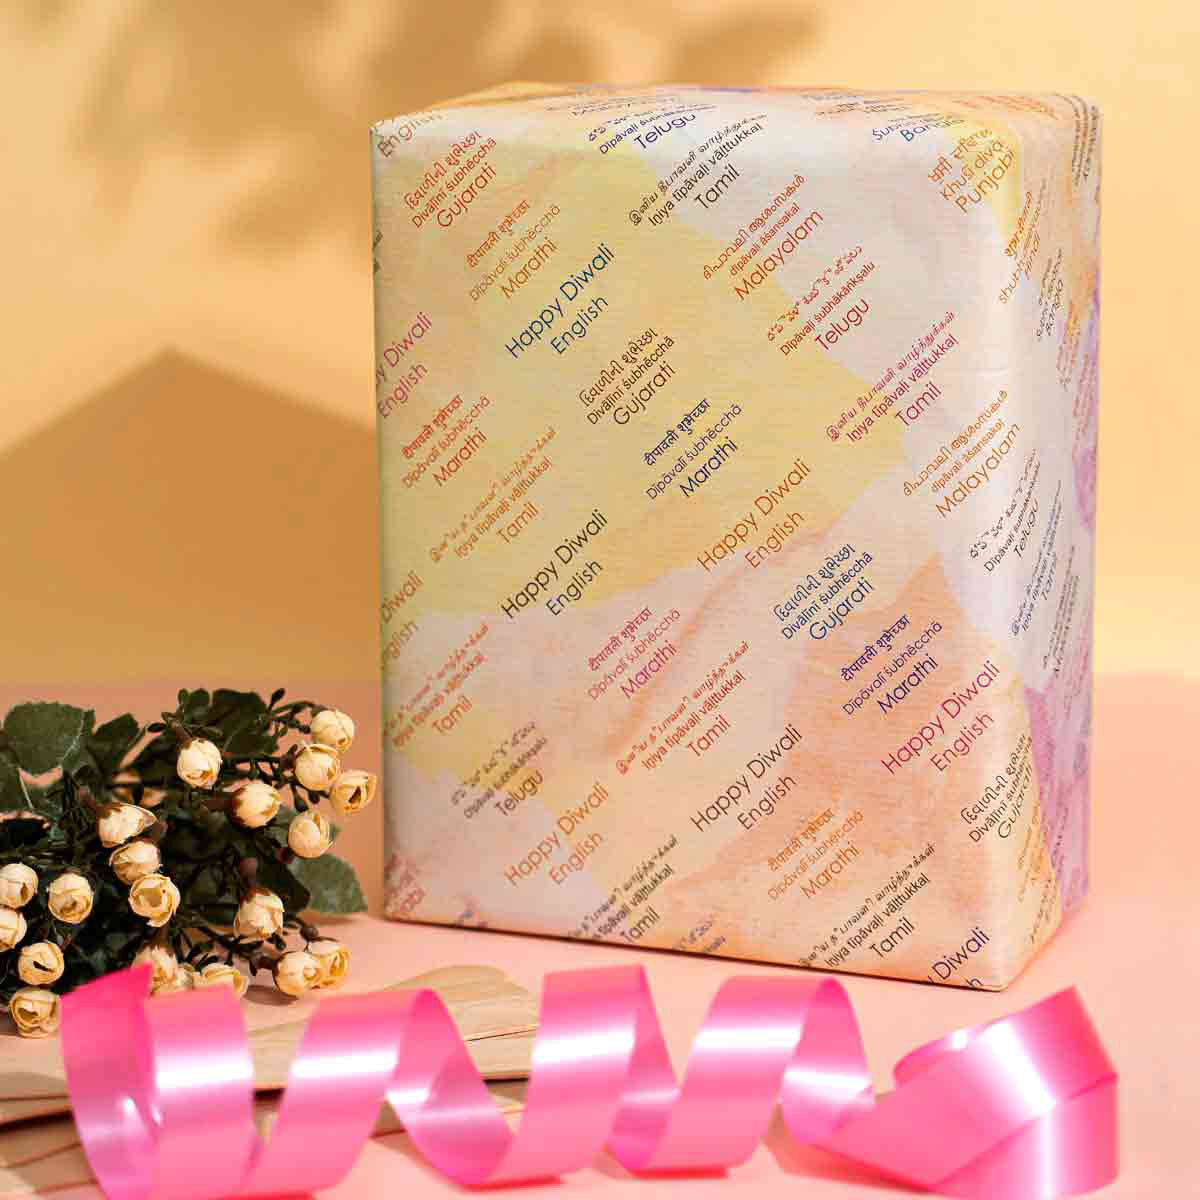 Diwali Greetings in All Languages Gift Wrapping Paper: Variety of Greetings in All Languages